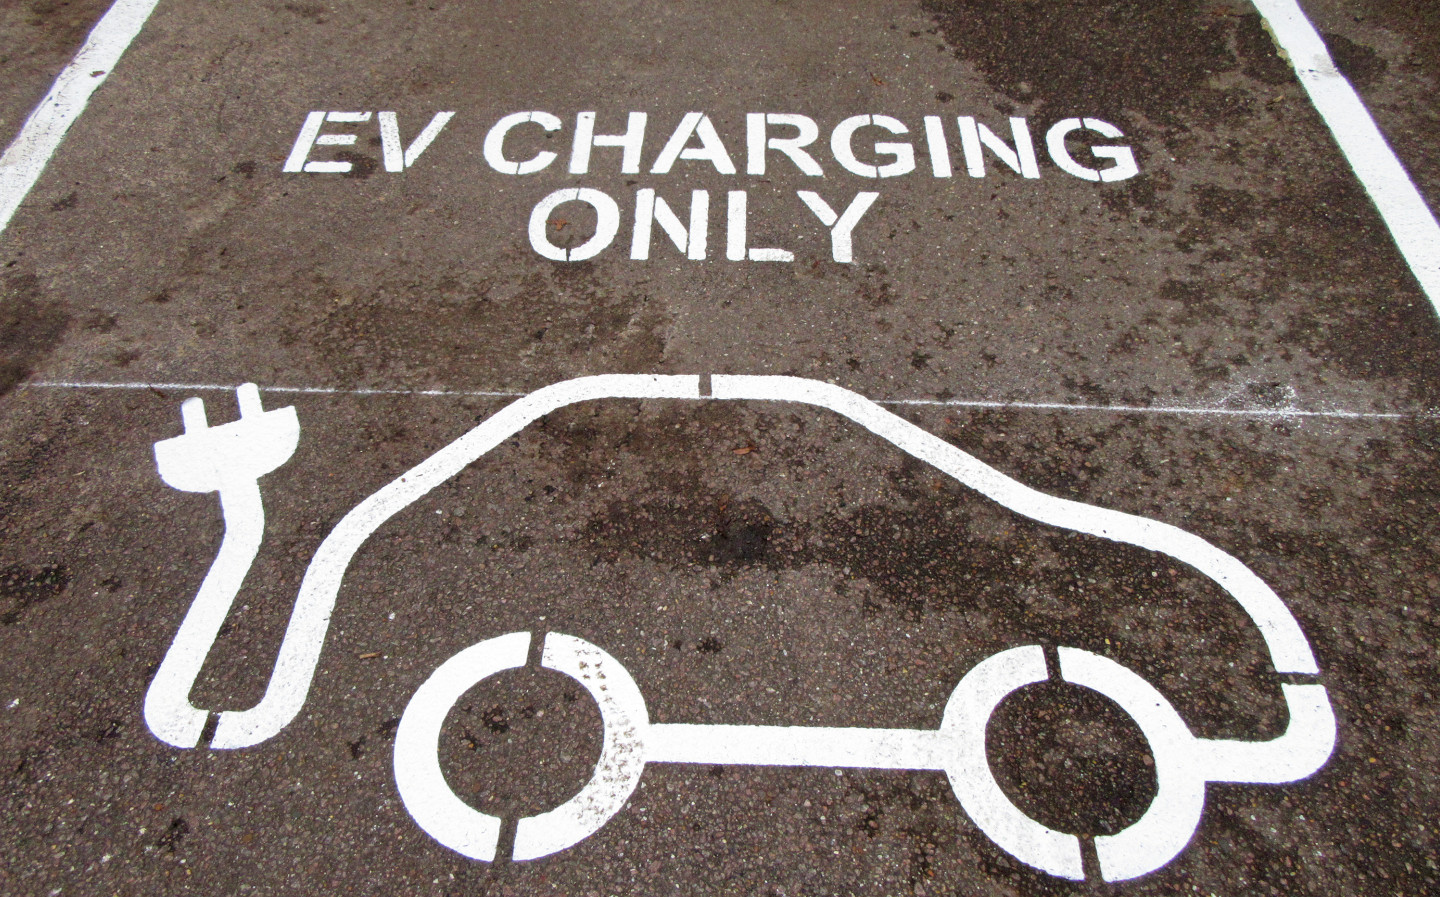 Electric charge points to be revamped with "iconic" design